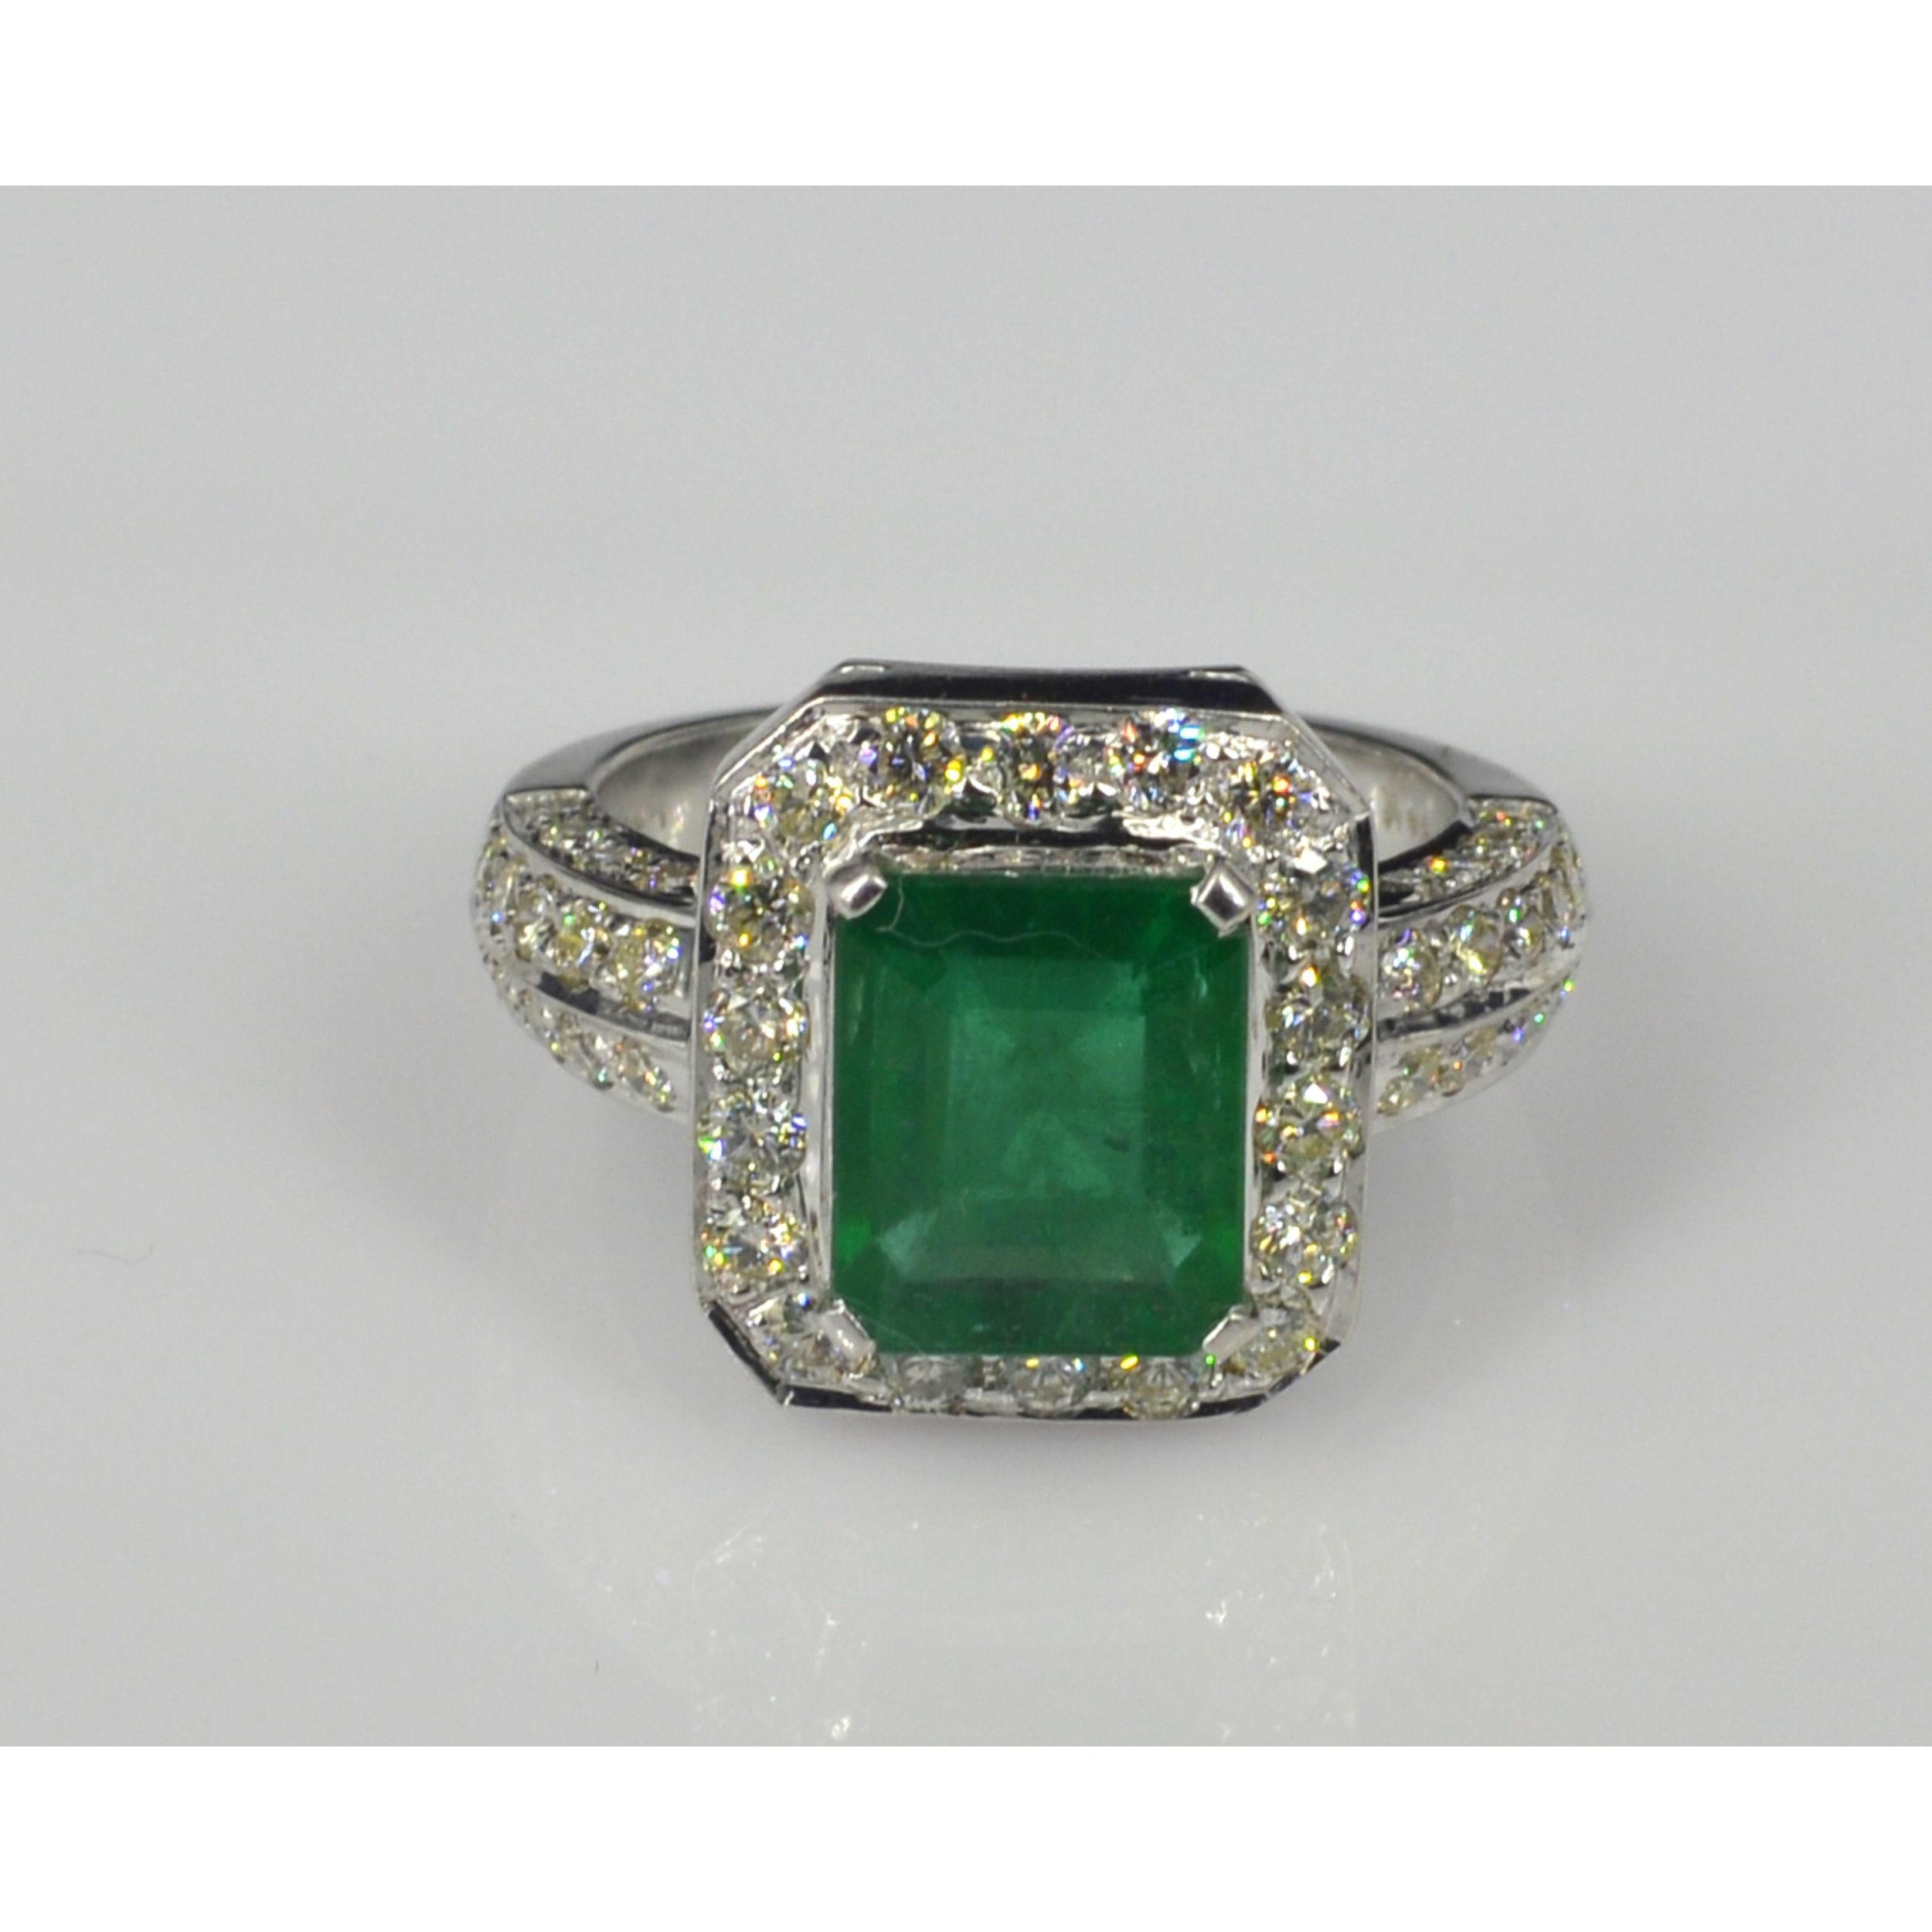 For Sale:  Certified 3 Carat Halo Emerald Diamond White Gold Engagement Ring, Band Ring